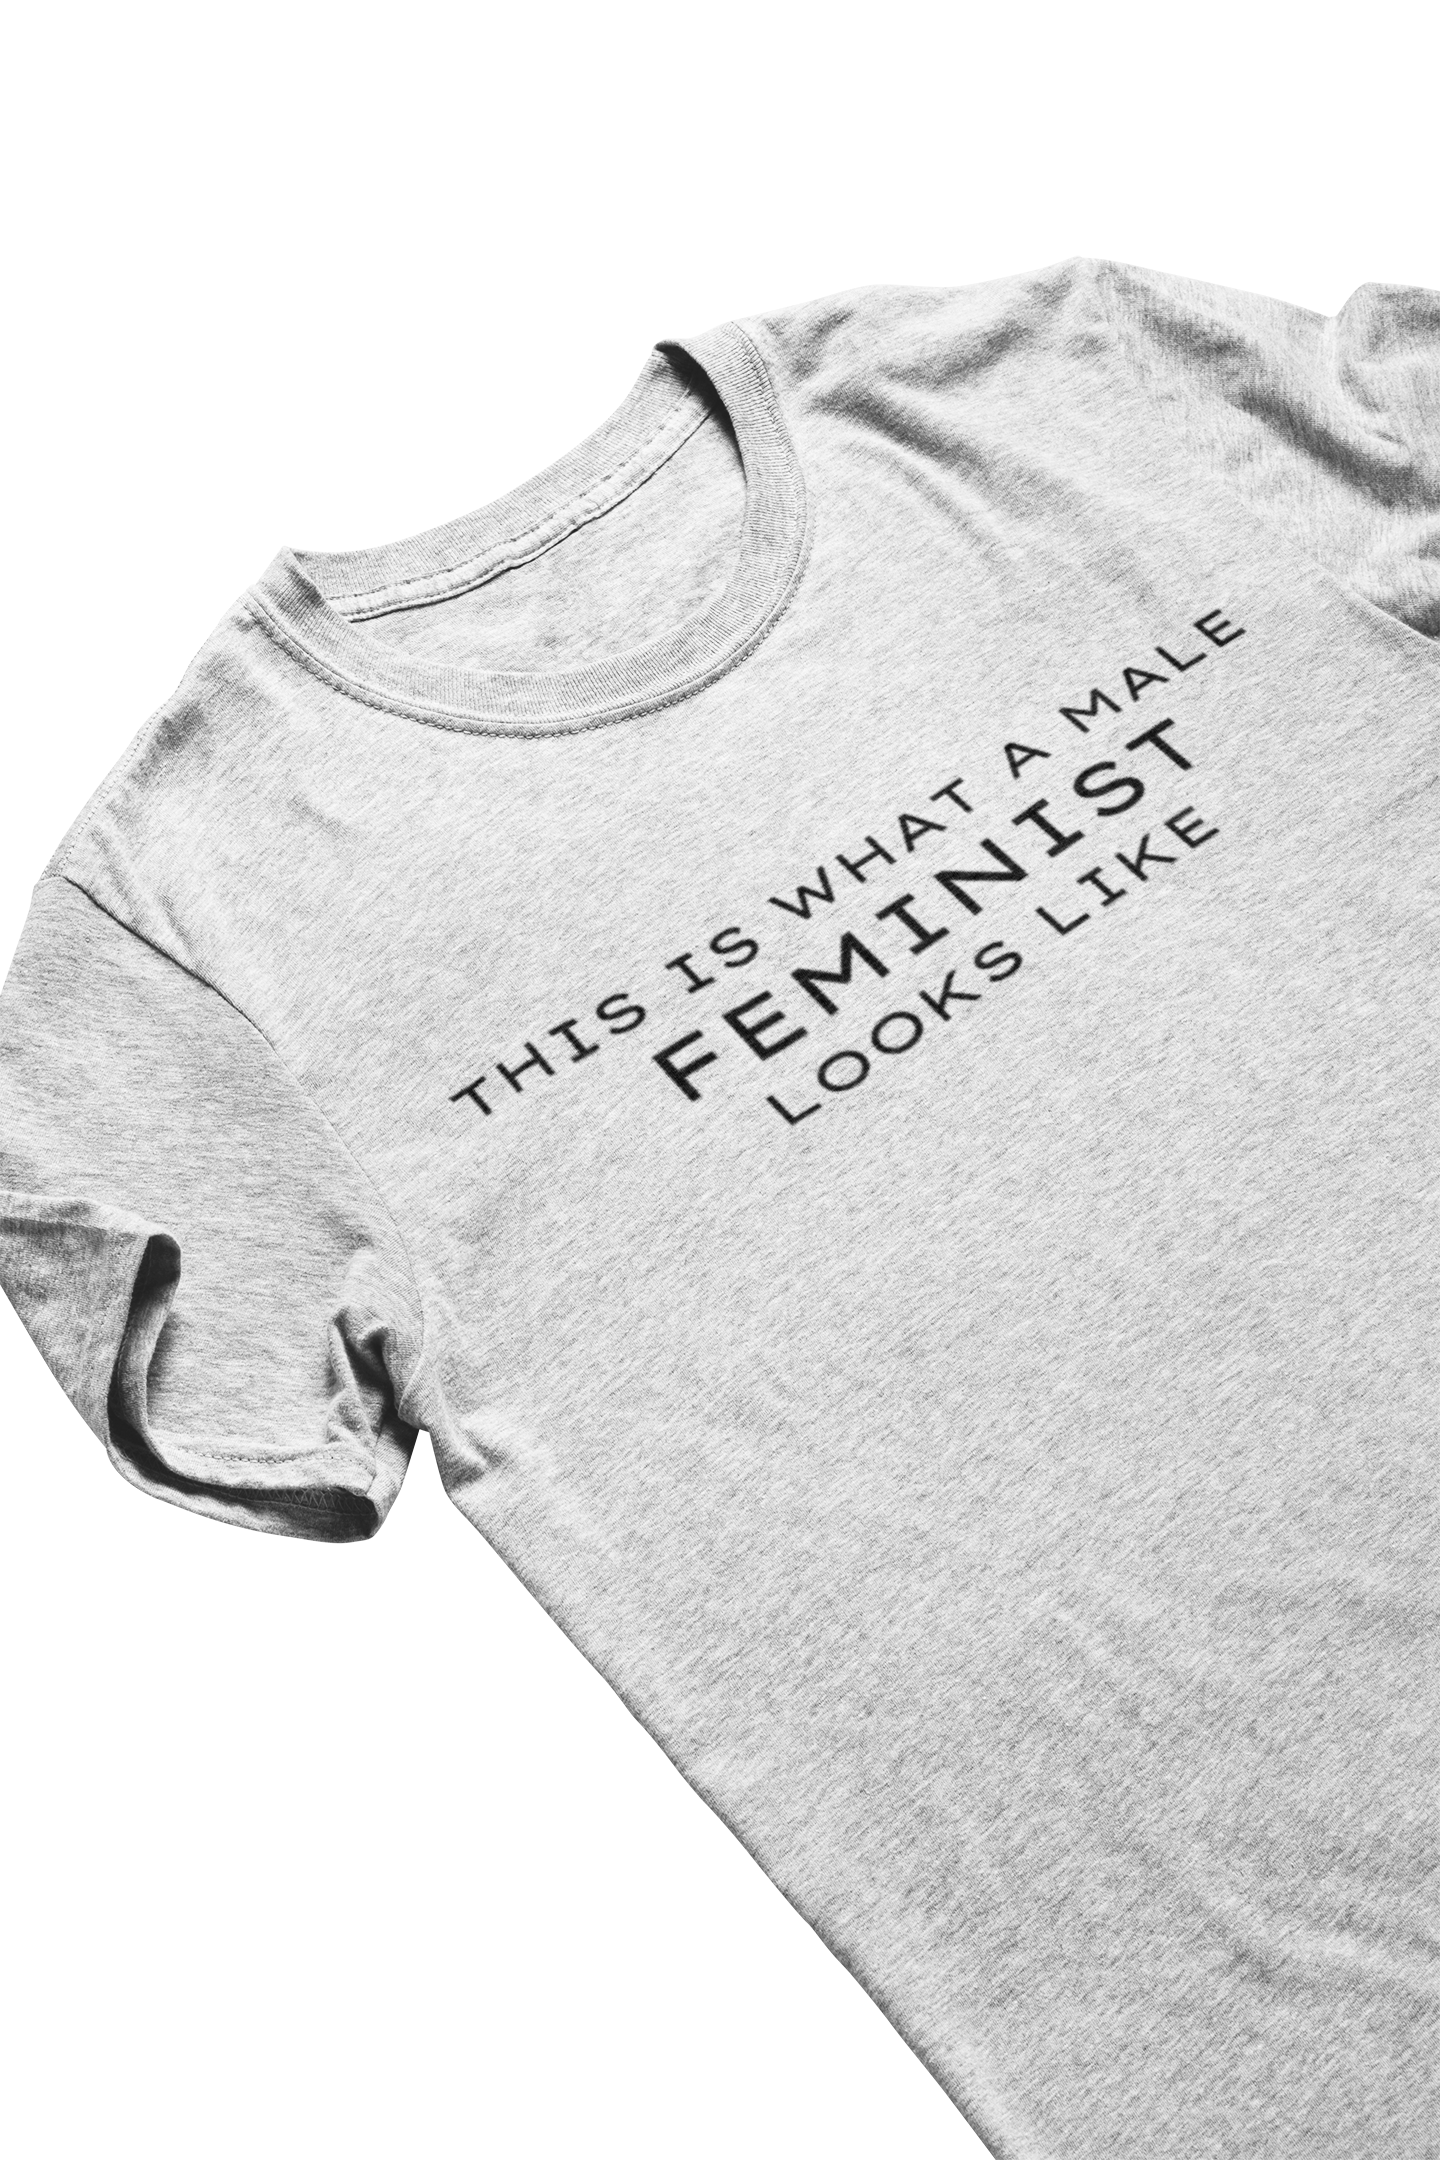 This Is What A Male Feminist Looks Like Tshirt